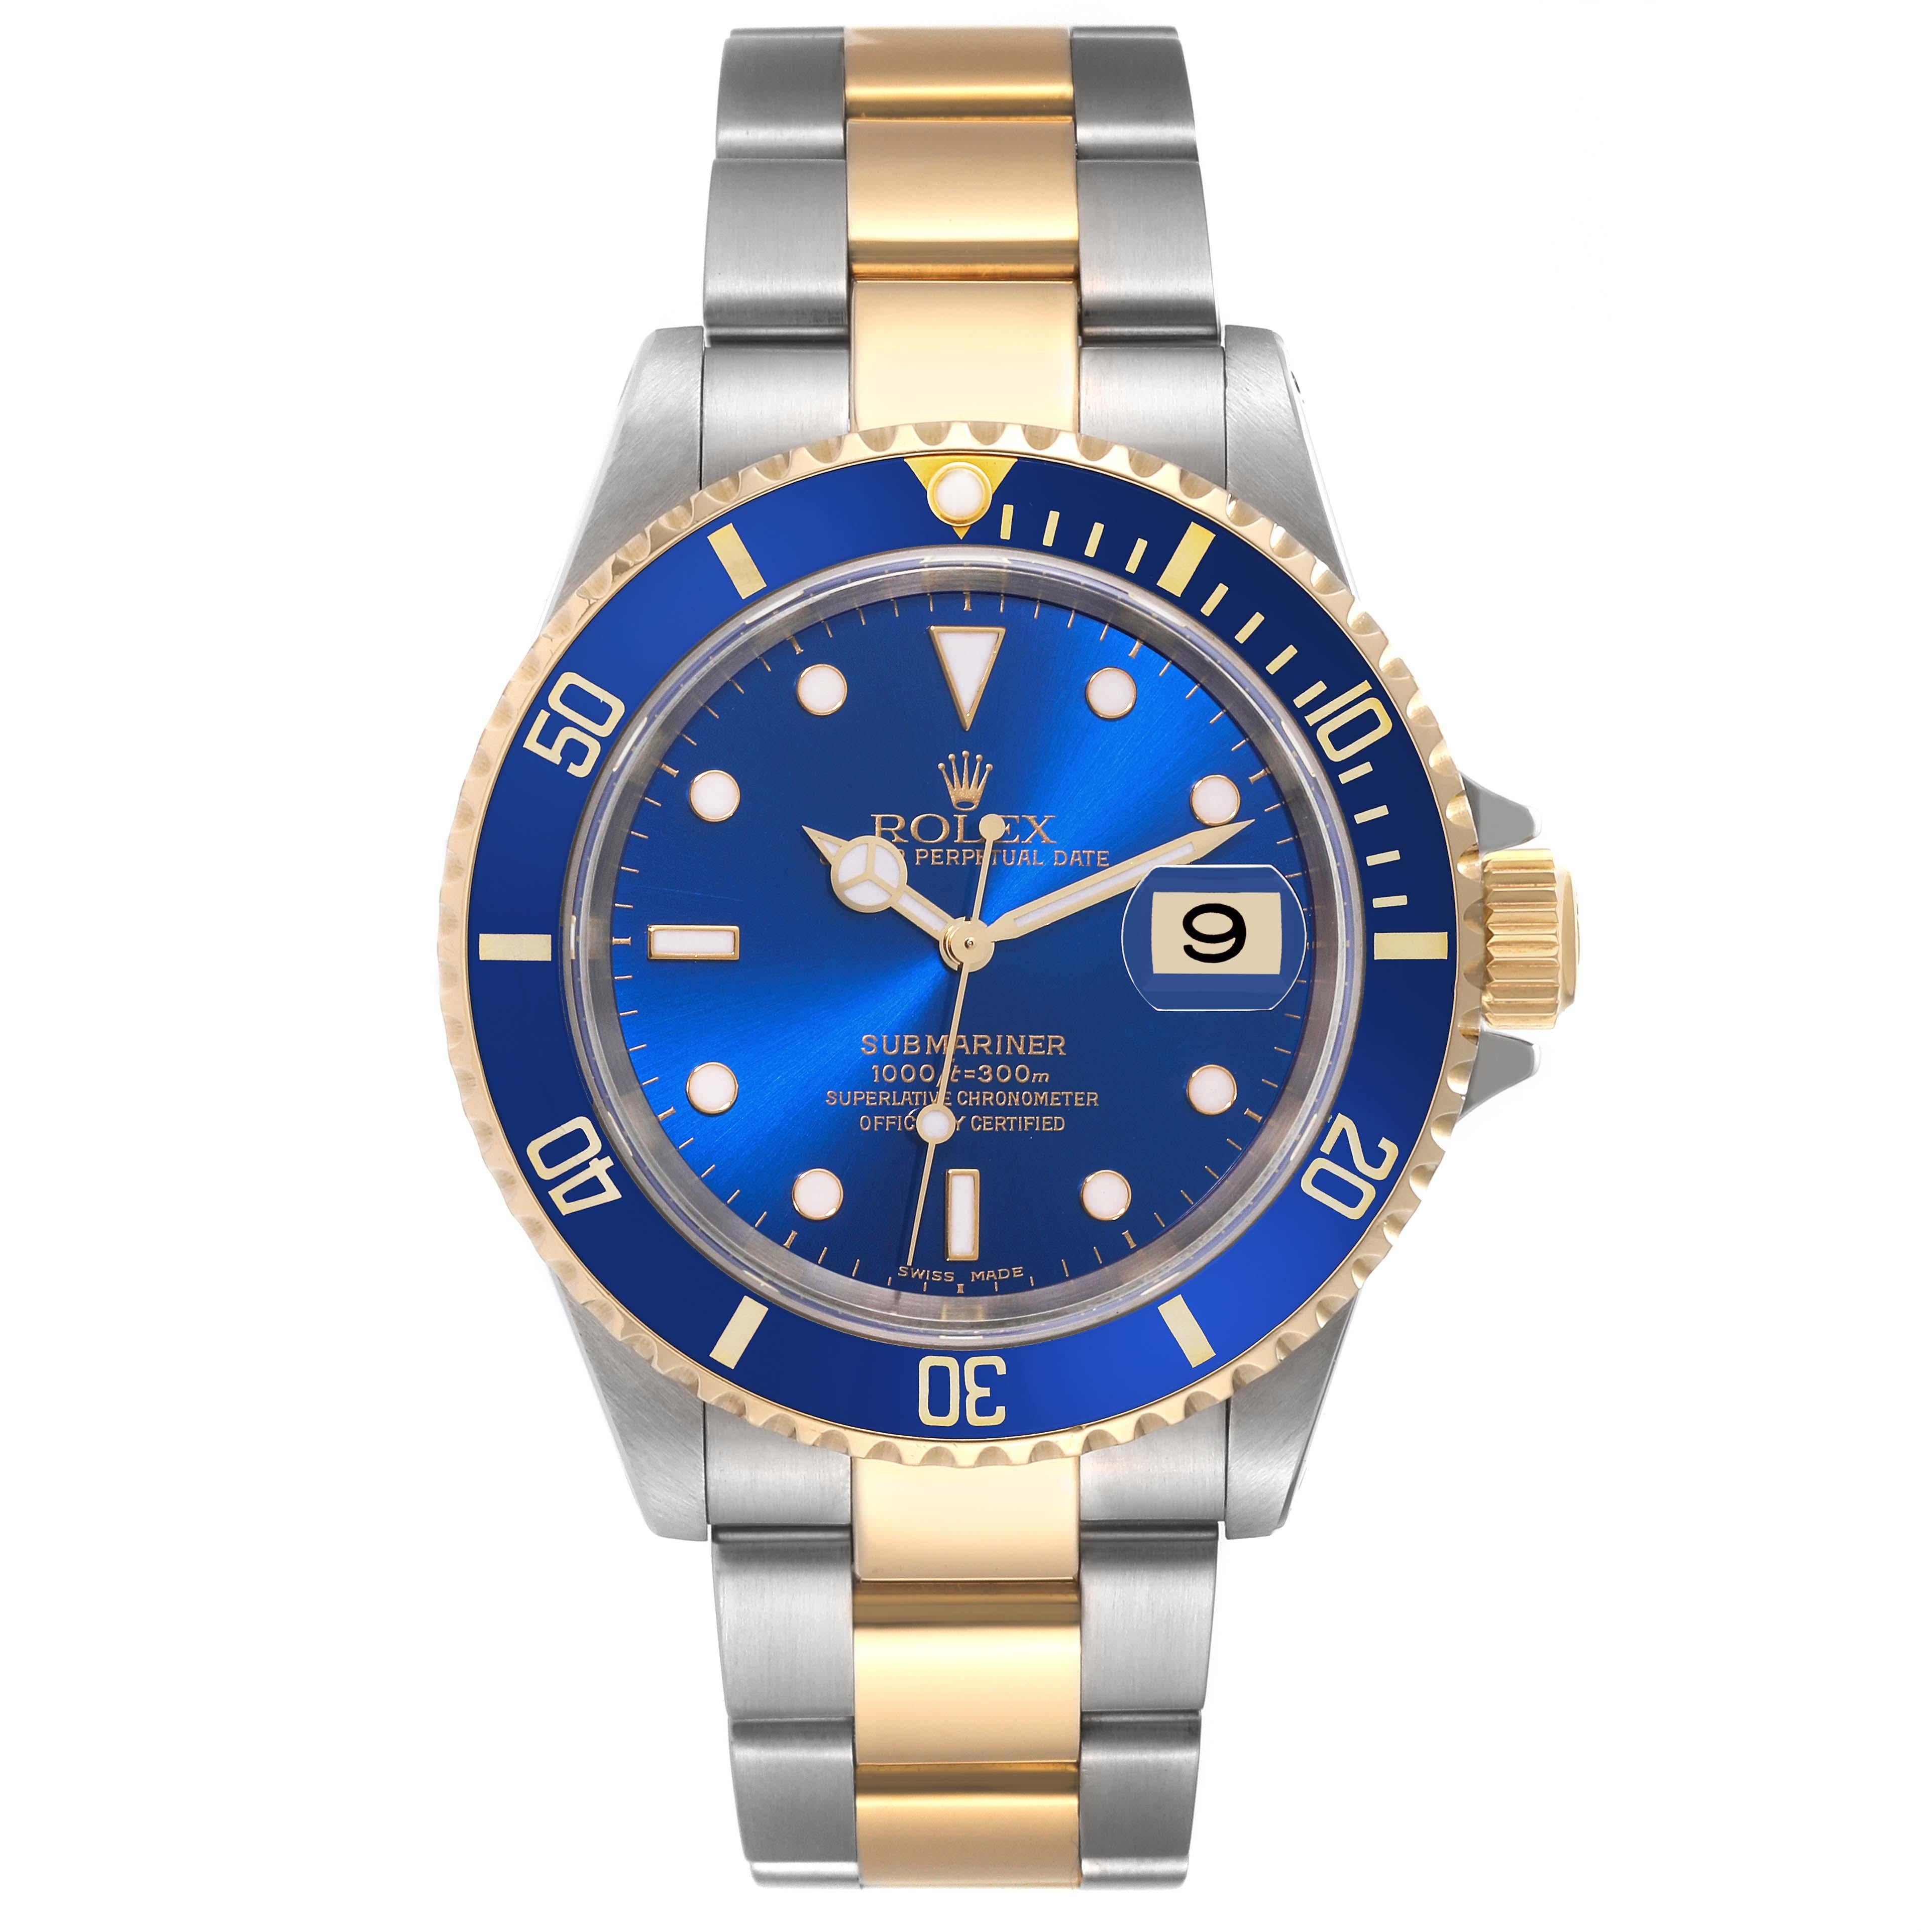 Rolex Submariner Blue Dial Steel Yellow Gold Mens Watch 16613. Officially certified chronometer automatic self-winding movement. Stainless steel and 18k yellow gold case 40 mm in diameter. Rolex logo on the crown. Blue insert special time-lapse